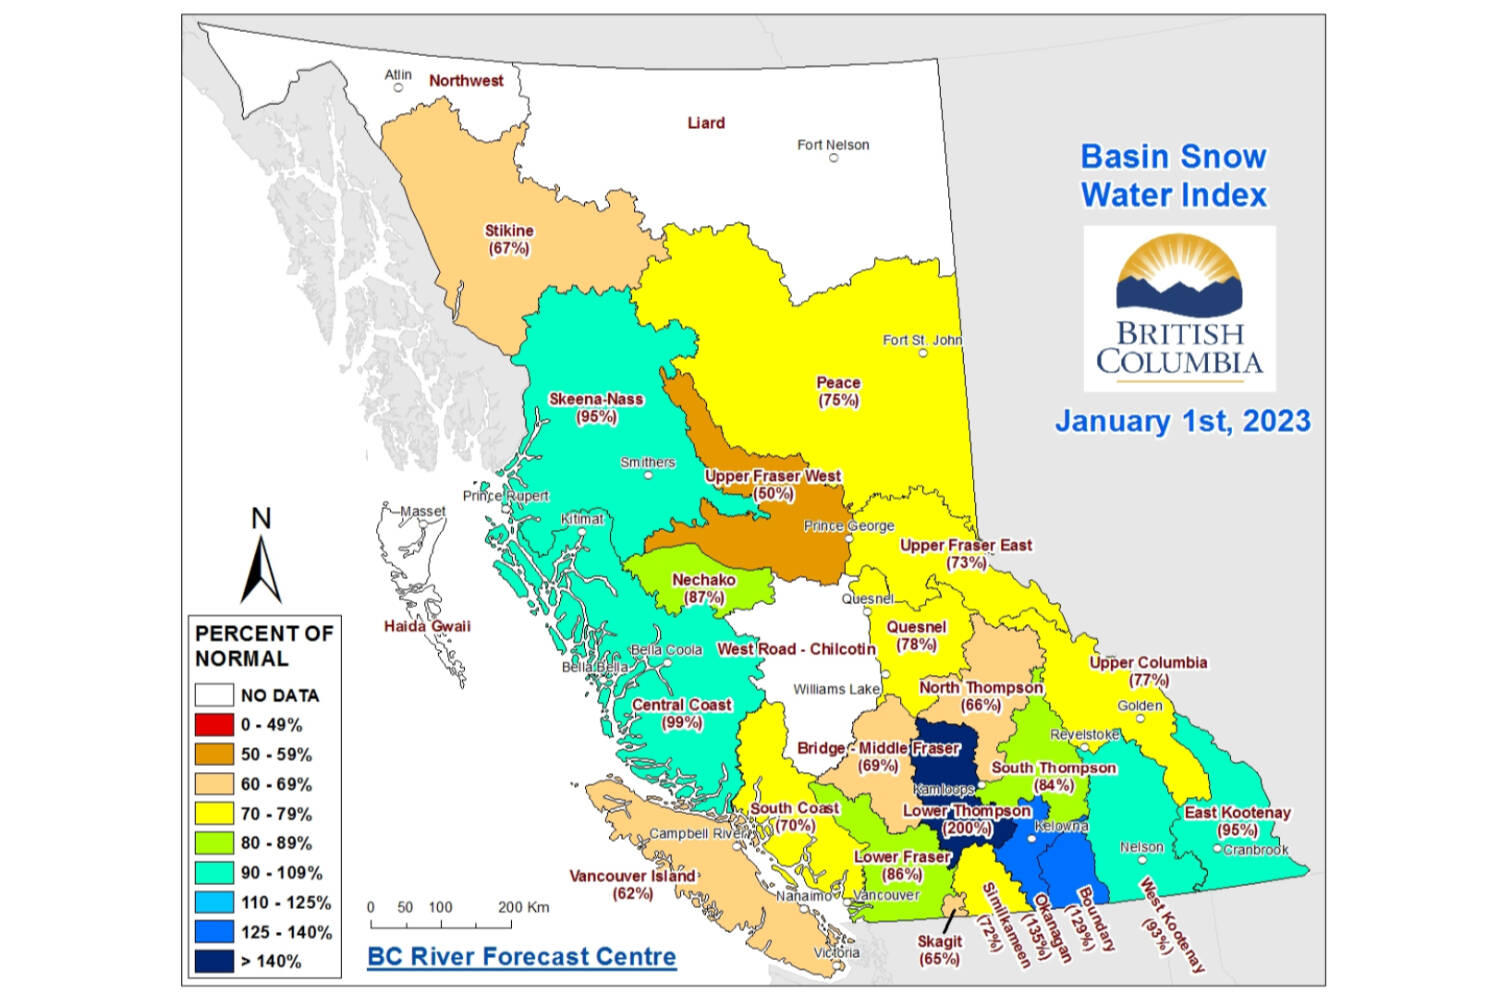 The Jan. 1 data from the B.C. River Forecast Centre shows snow levels below normal in much of the province, with the exception of the Okanagan and Boundary regions. (B.C. River Forecast Centre image)